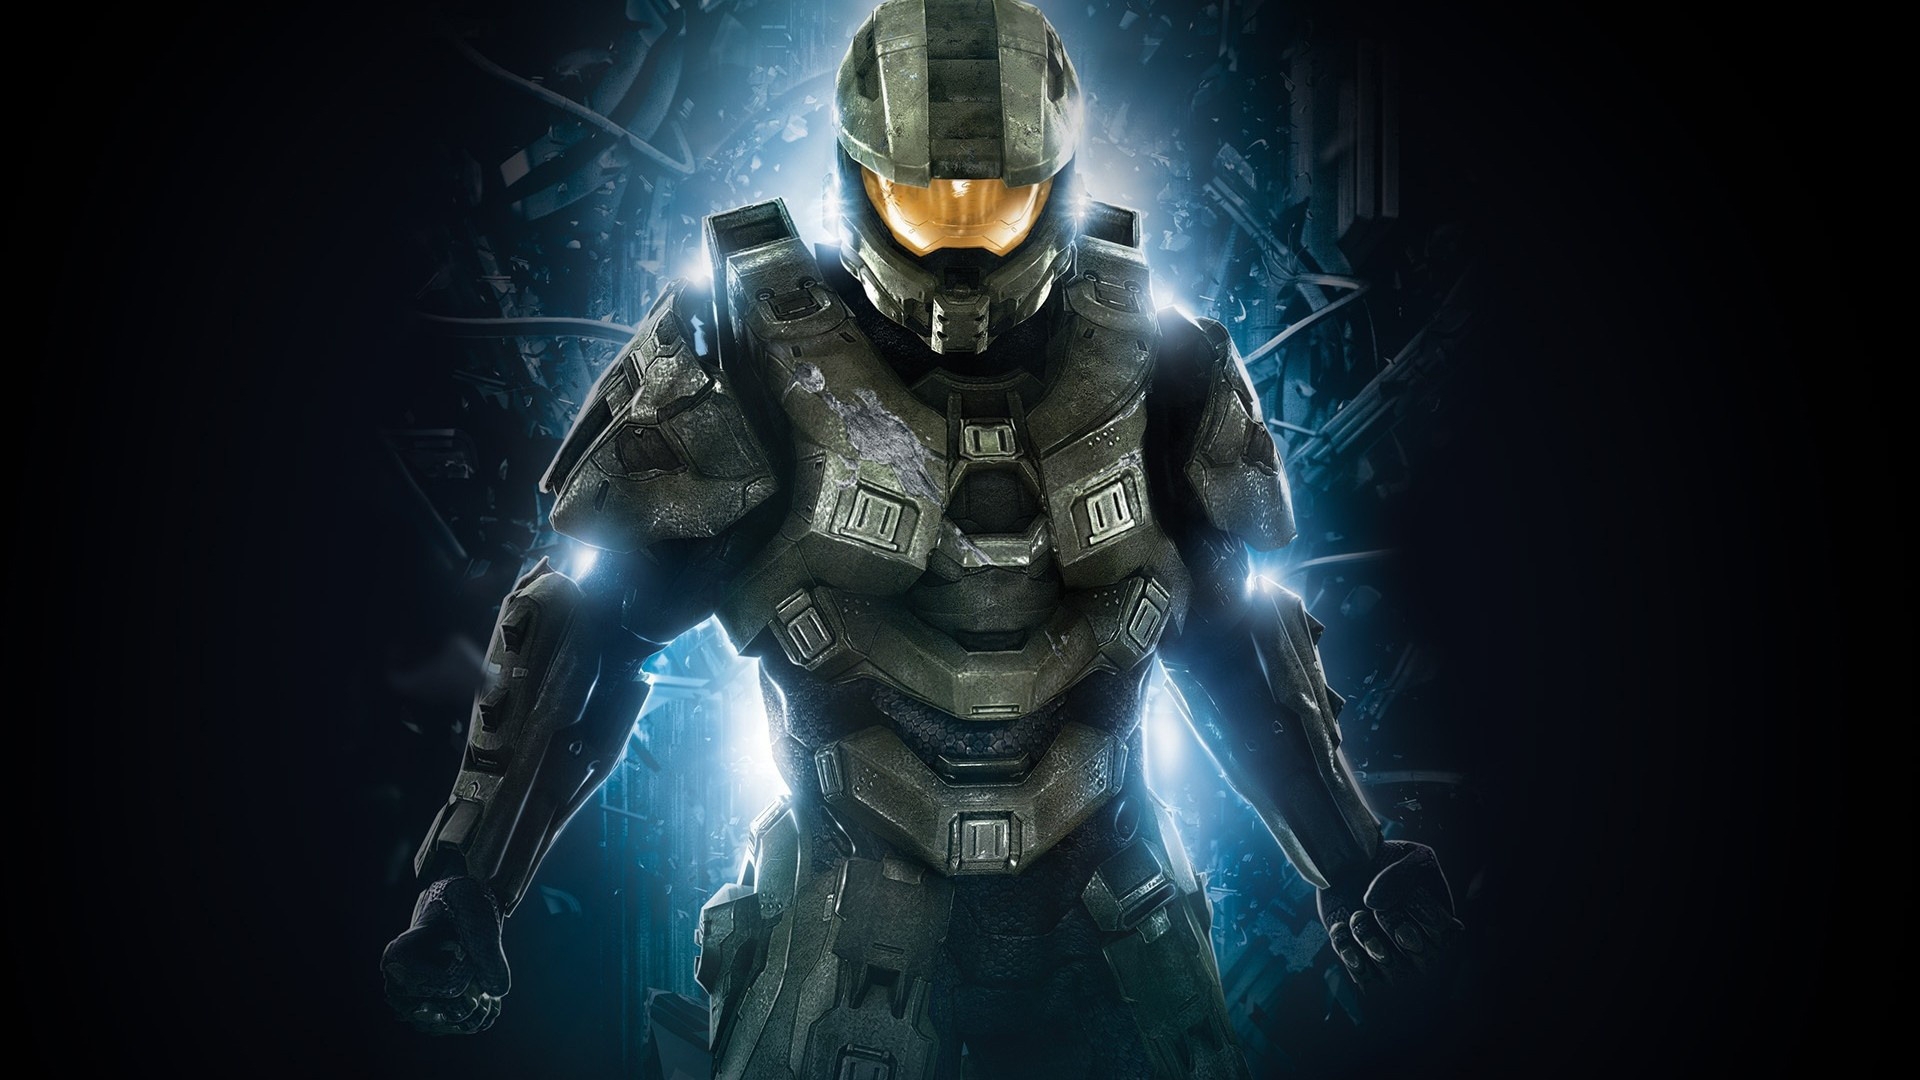 Halo Character for 1920 x 1080 HDTV 1080p resolution